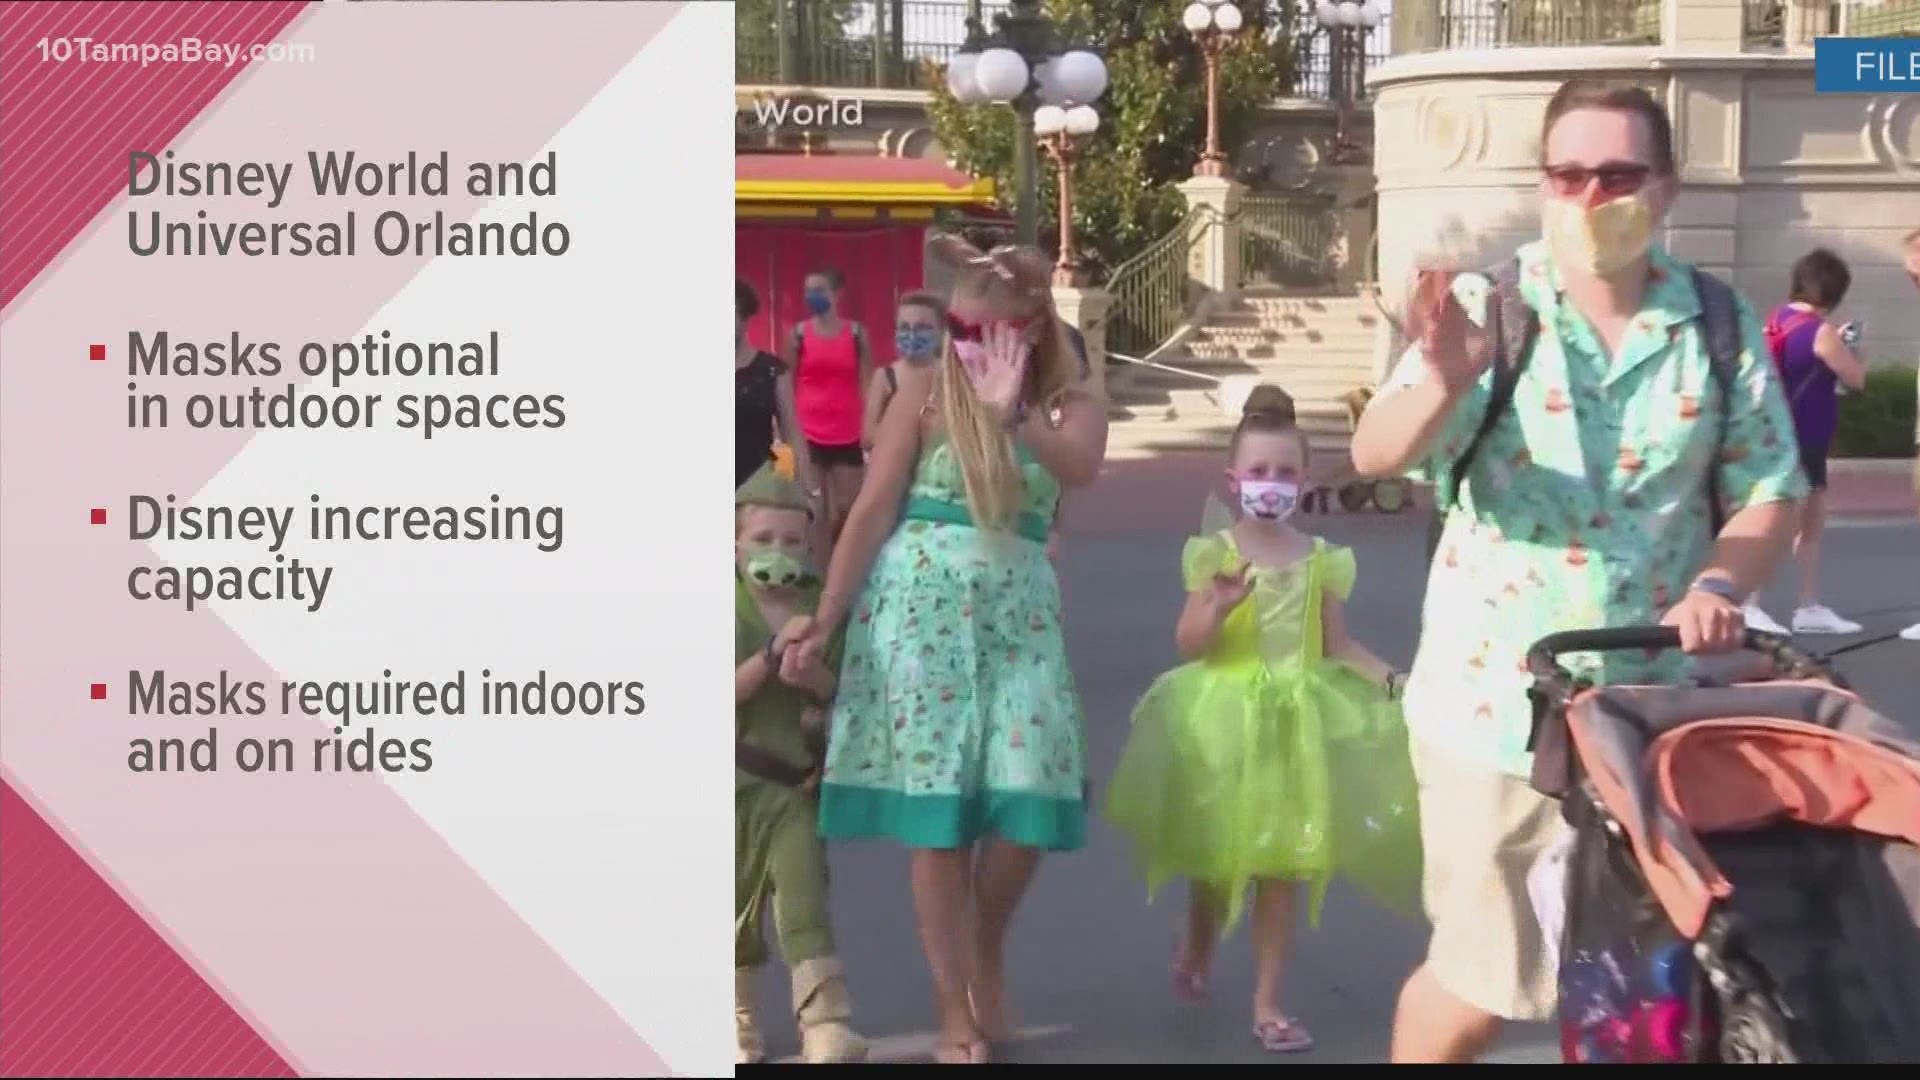 Masks will still be required on all attractions and indoors, according to current rules.